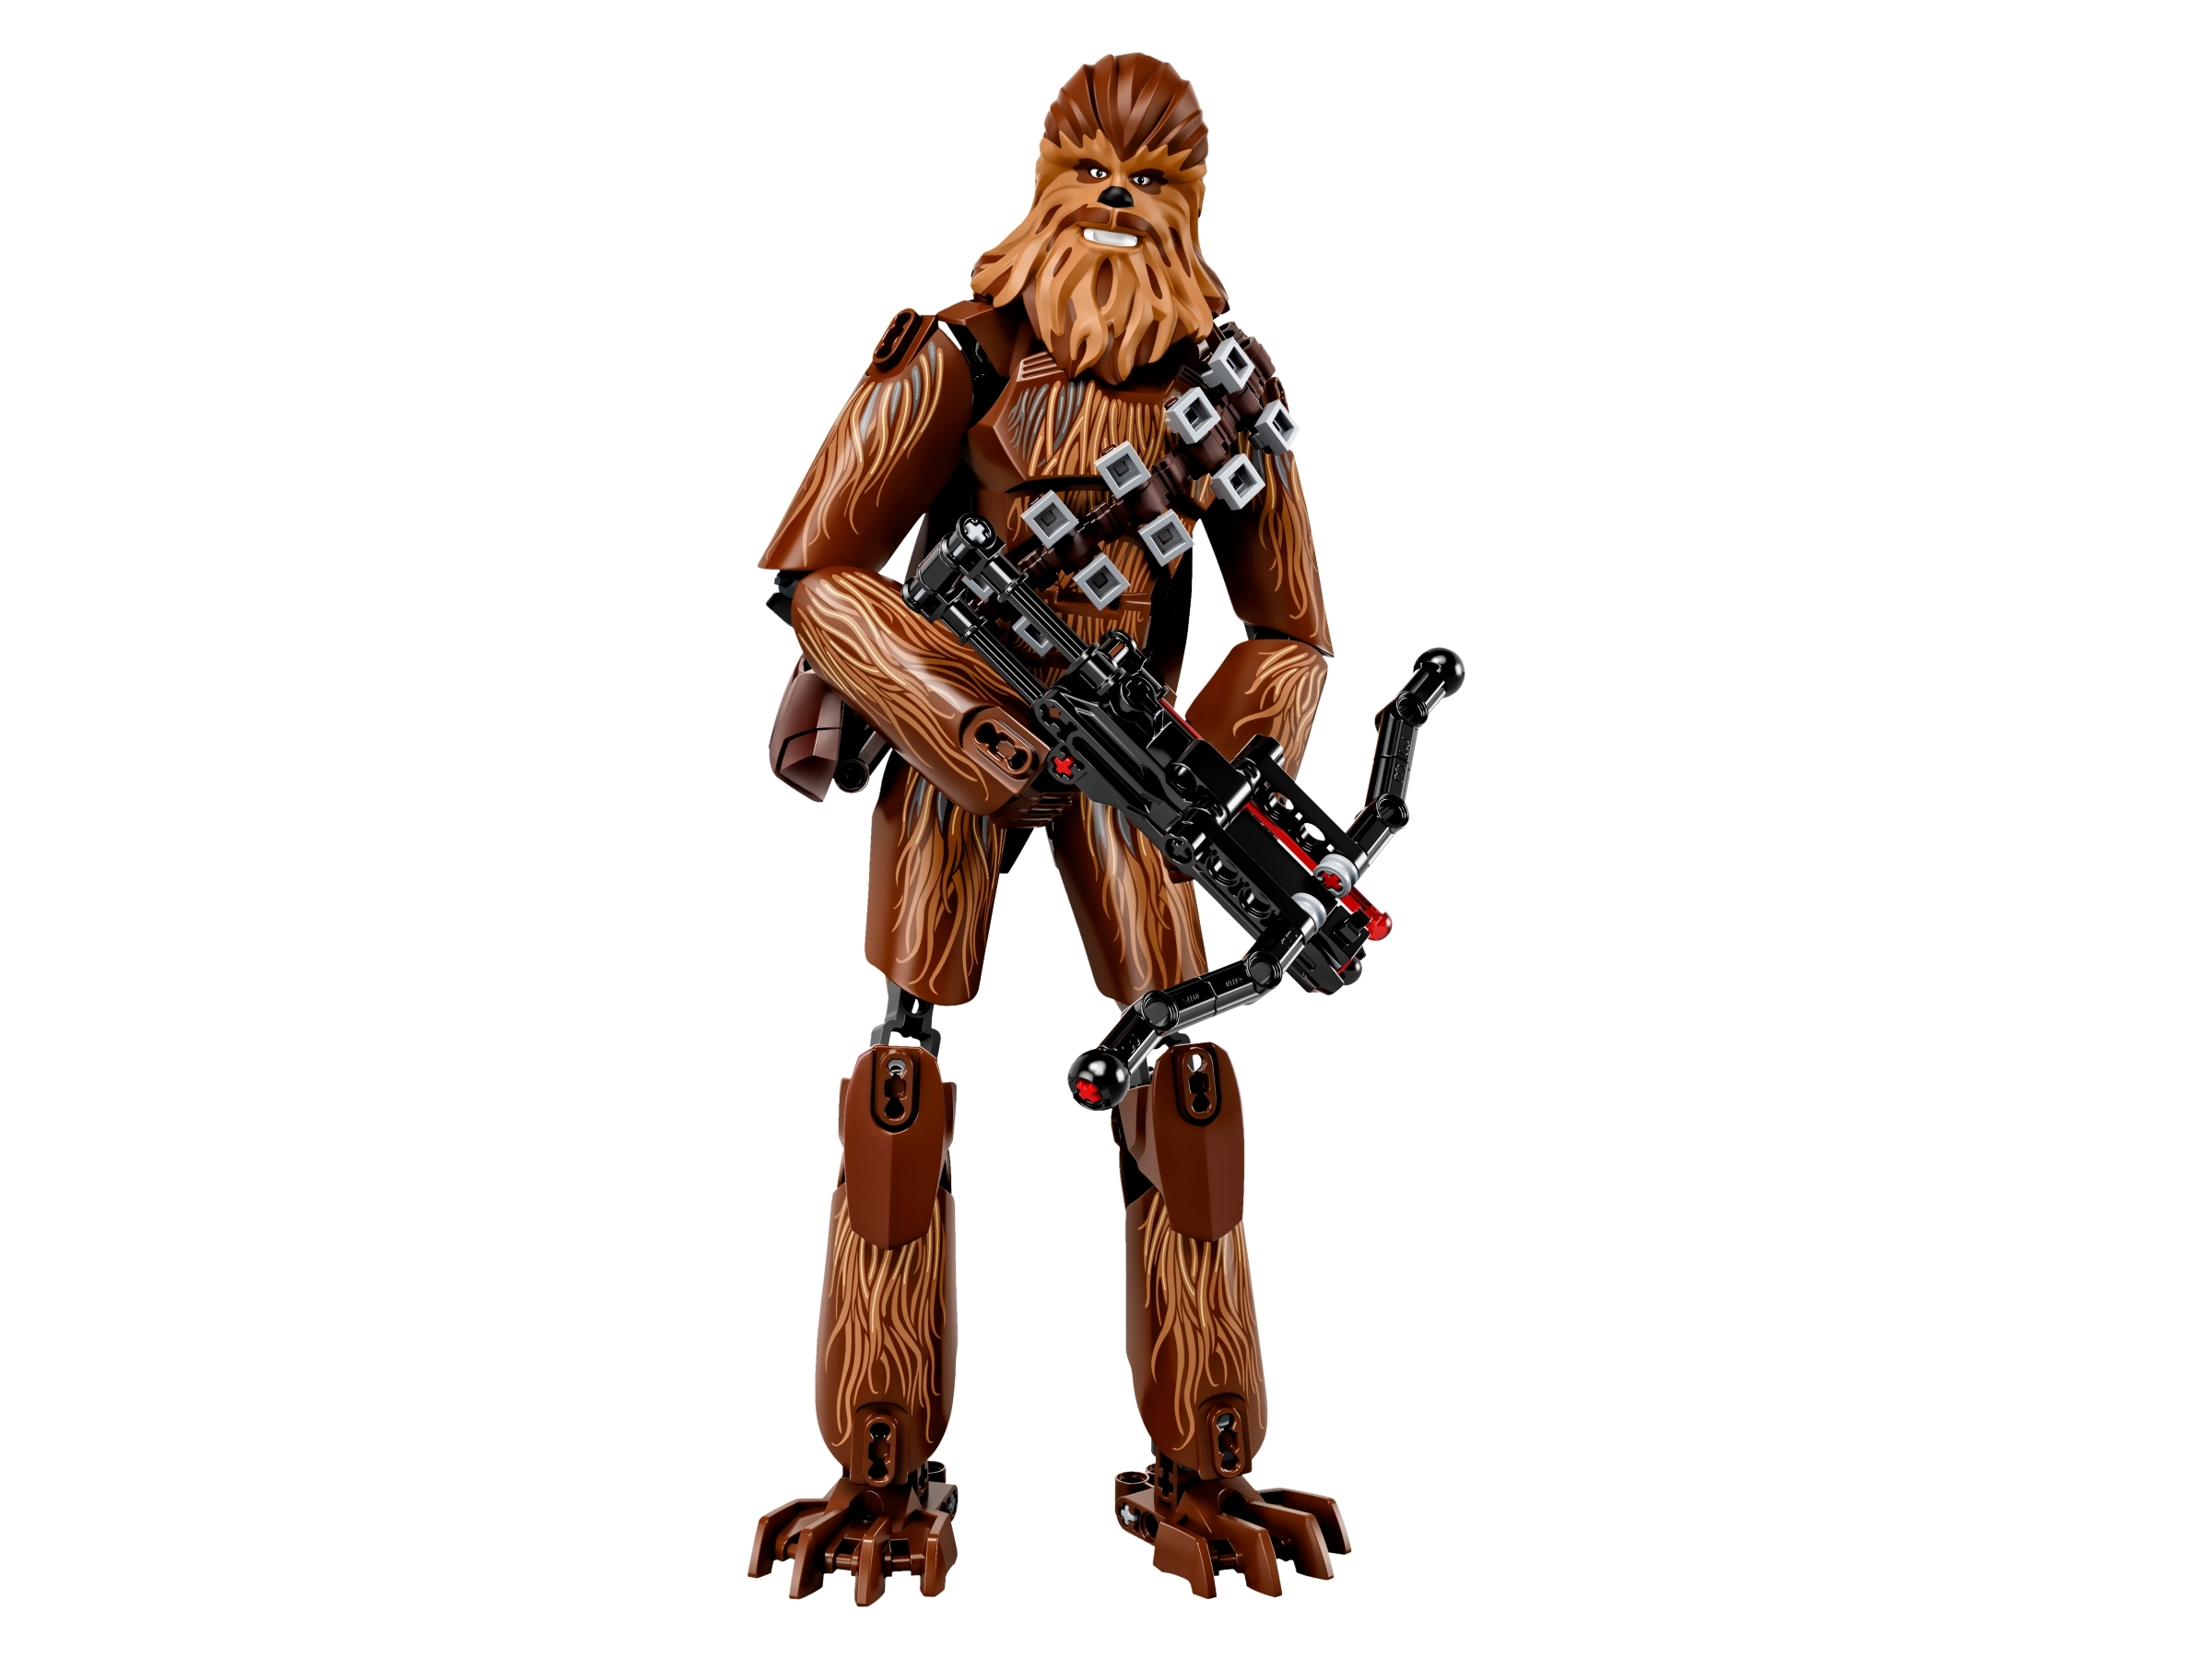 CHEWBACCA Buildable Figure STAR WARS fits lego BIONICLE & HERO FACTORY 